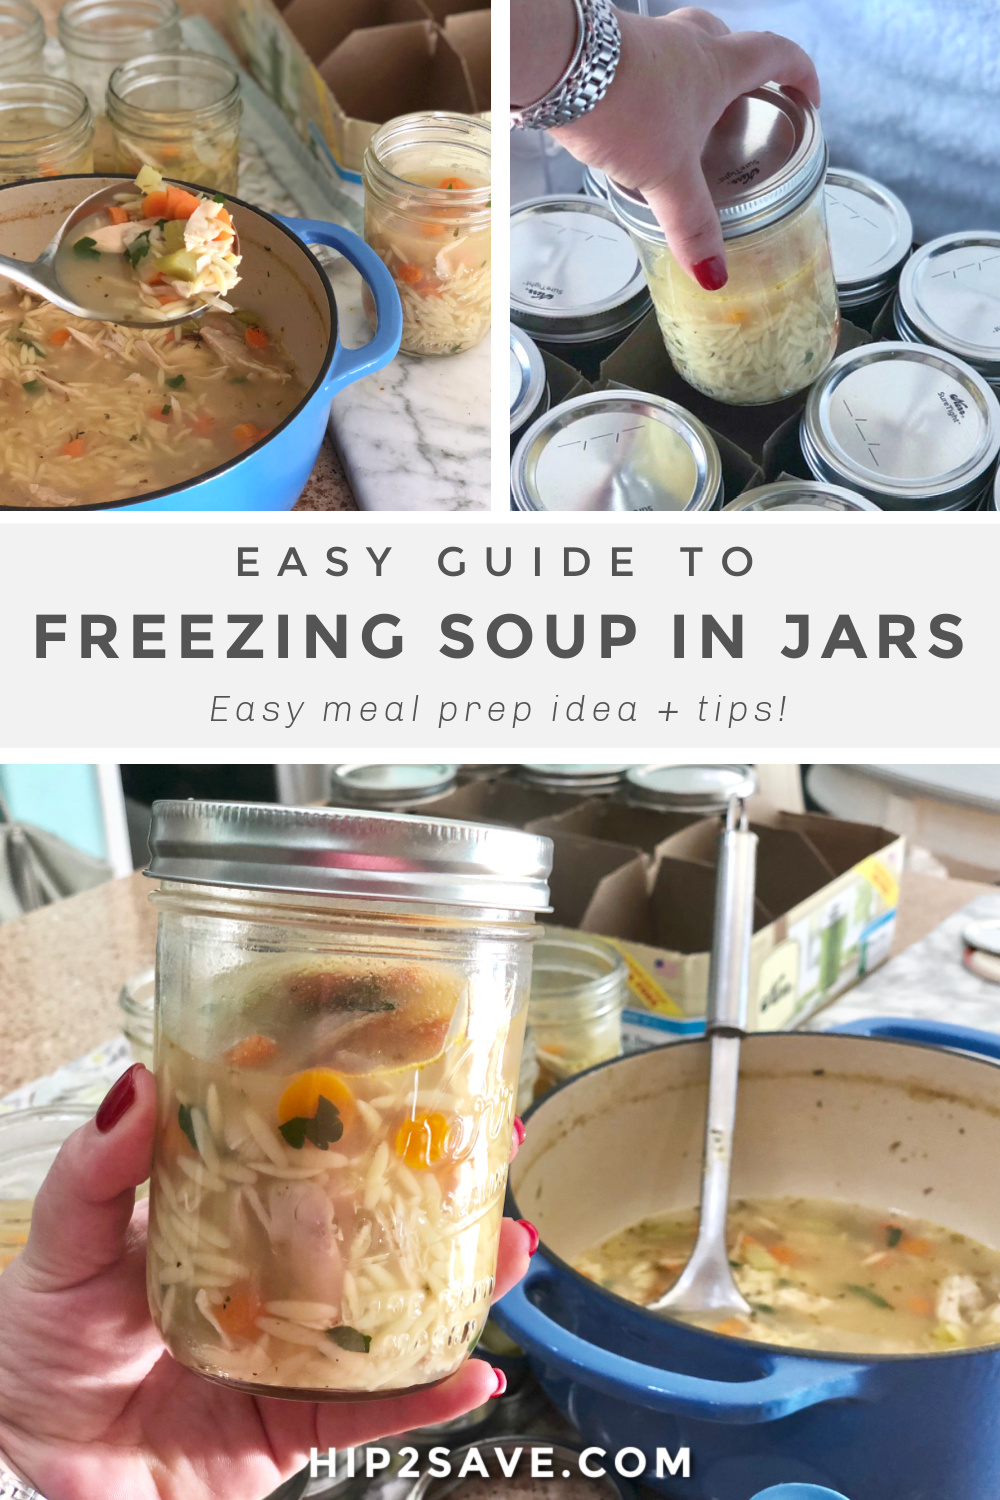 I Tried the Mason Jar Soup Trend, and It…Sort of Worked